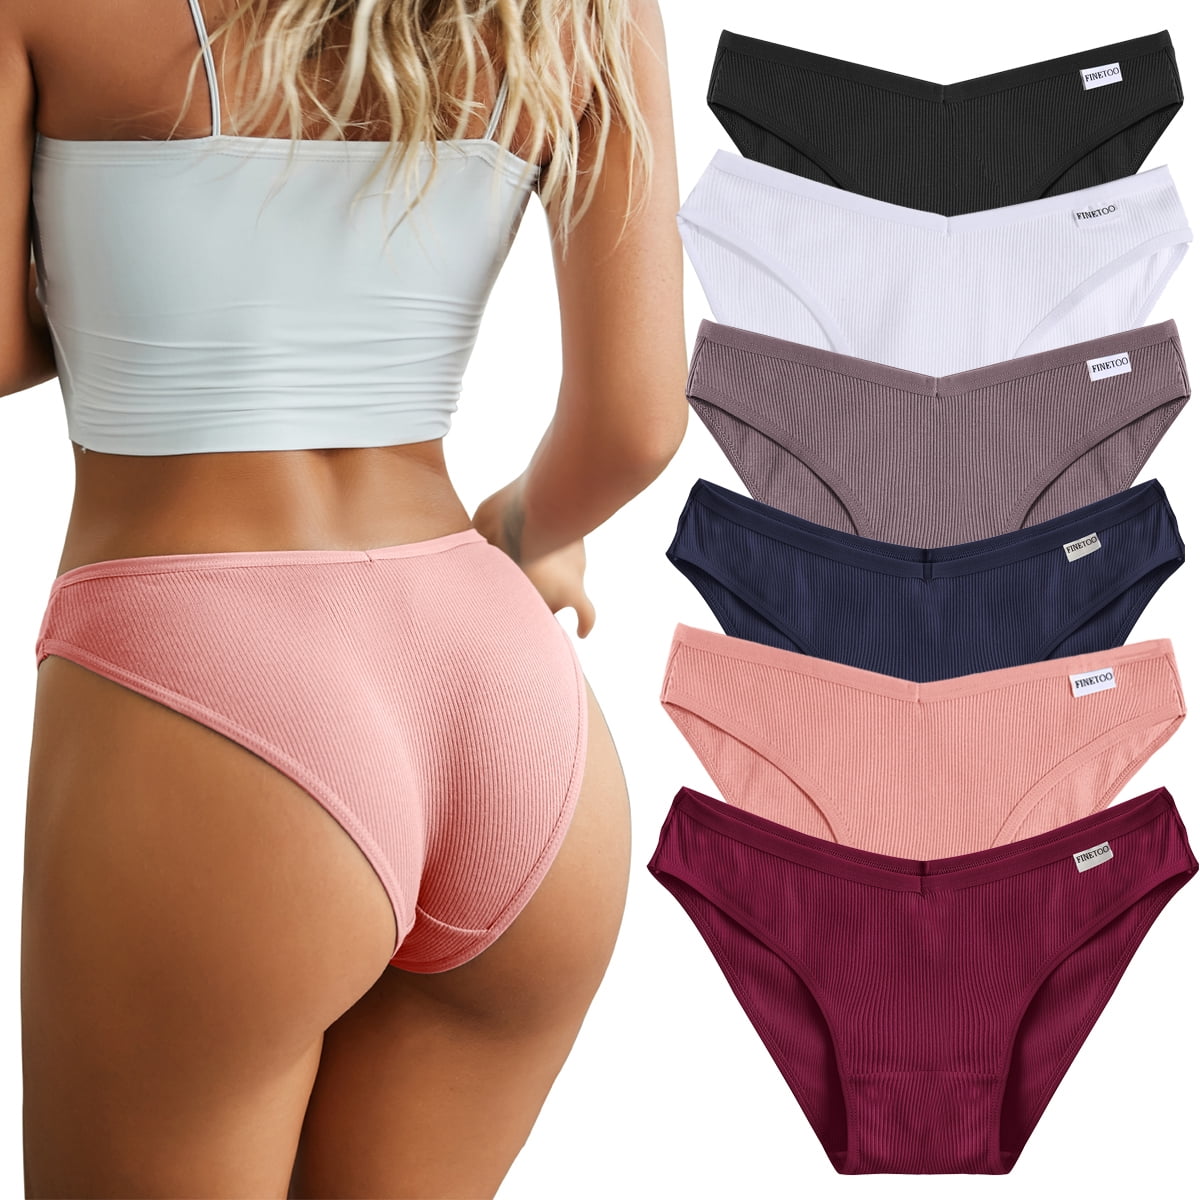 FINETOO Low-Rise Cotton Panties Women Bikini Underwear Sexy Hollow Mesh  Briefs Girls Underpants M-XL Female Lingerie Panty 2022 - Price history &  Review, AliExpress Seller - finetoo Official Store